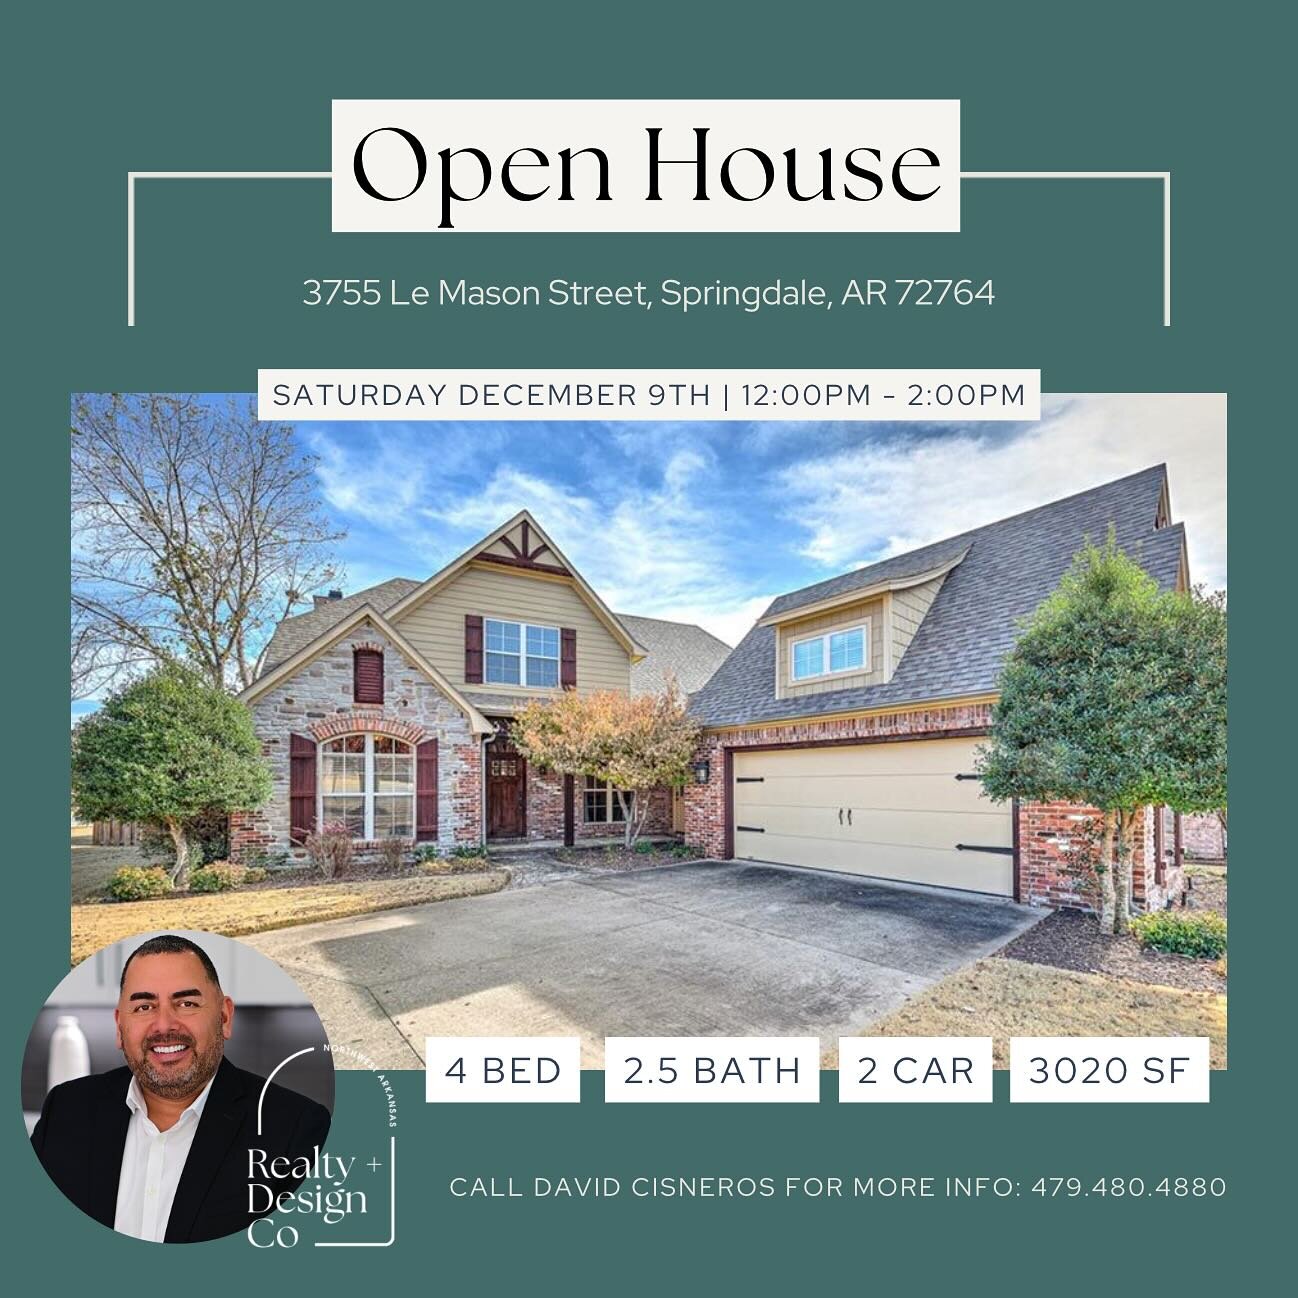 WEEKEND OPEN HOUSES! Get ready to tour some awesome properties with our team Saturday and Sunday. From a large corner lot to new construction&hellip;.you don&rsquo;t want to miss this. See you there.

Contact us for more information at 479.480.4880.
